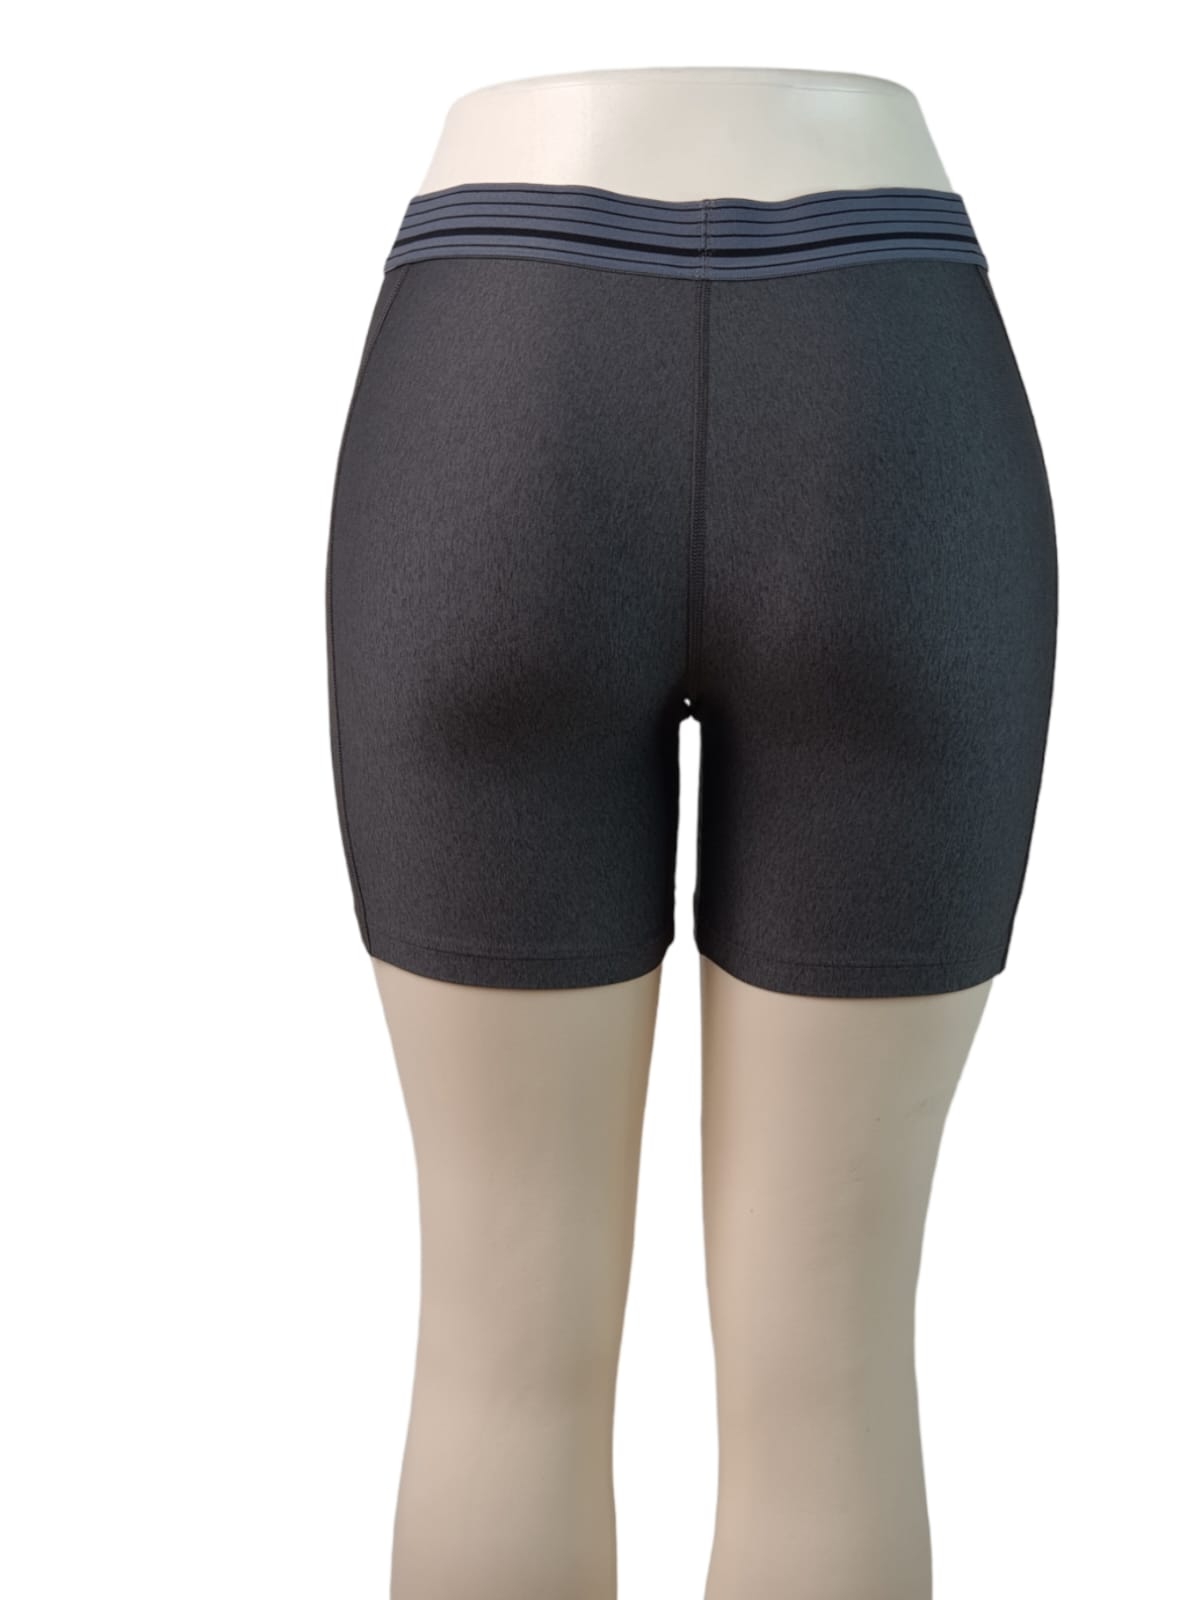 Under Armour Black Cycling Short (M)